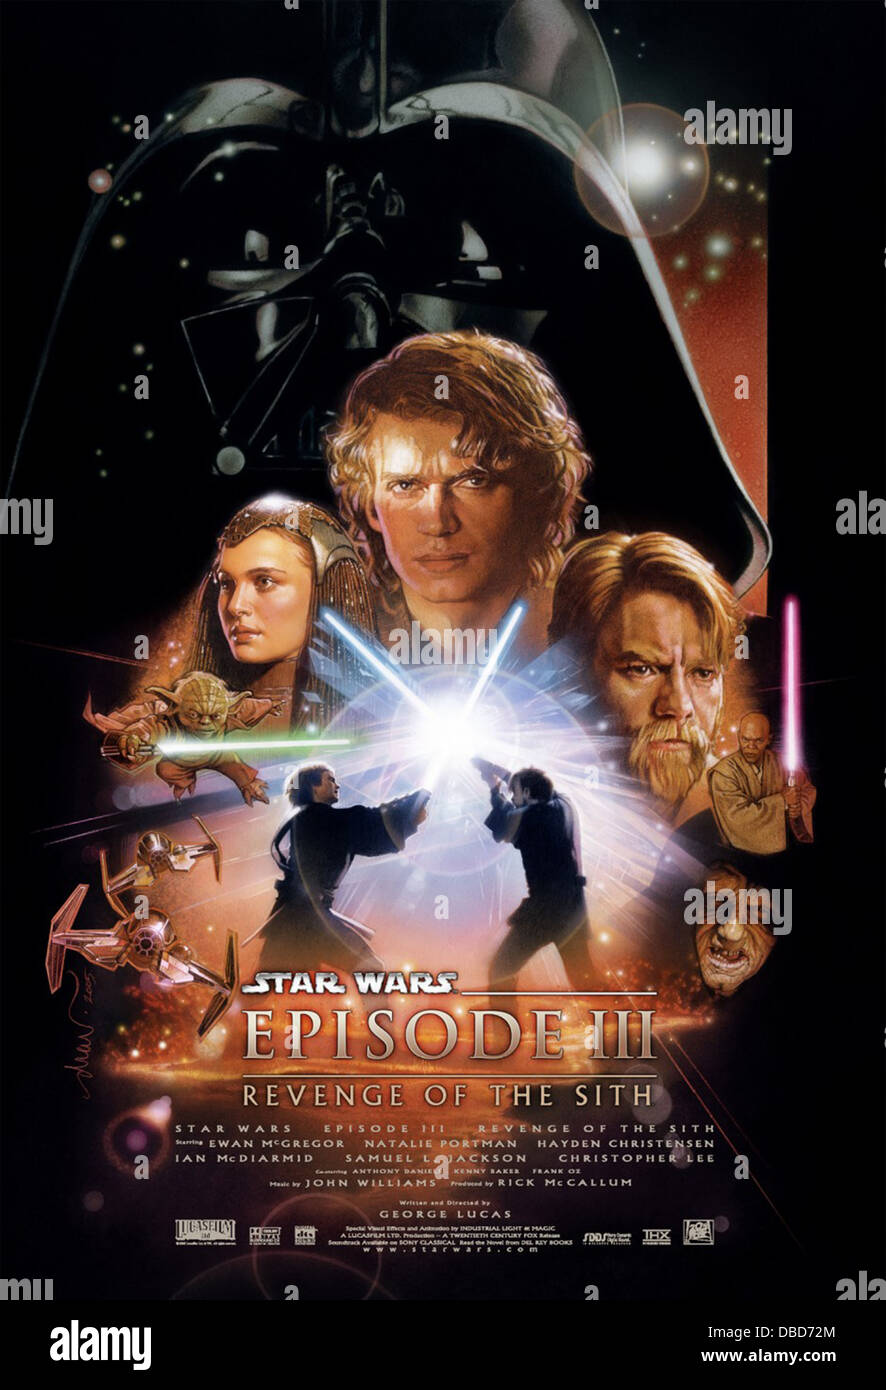 Star Wars Poster High Resolution Stock Photography and Images - Alamy